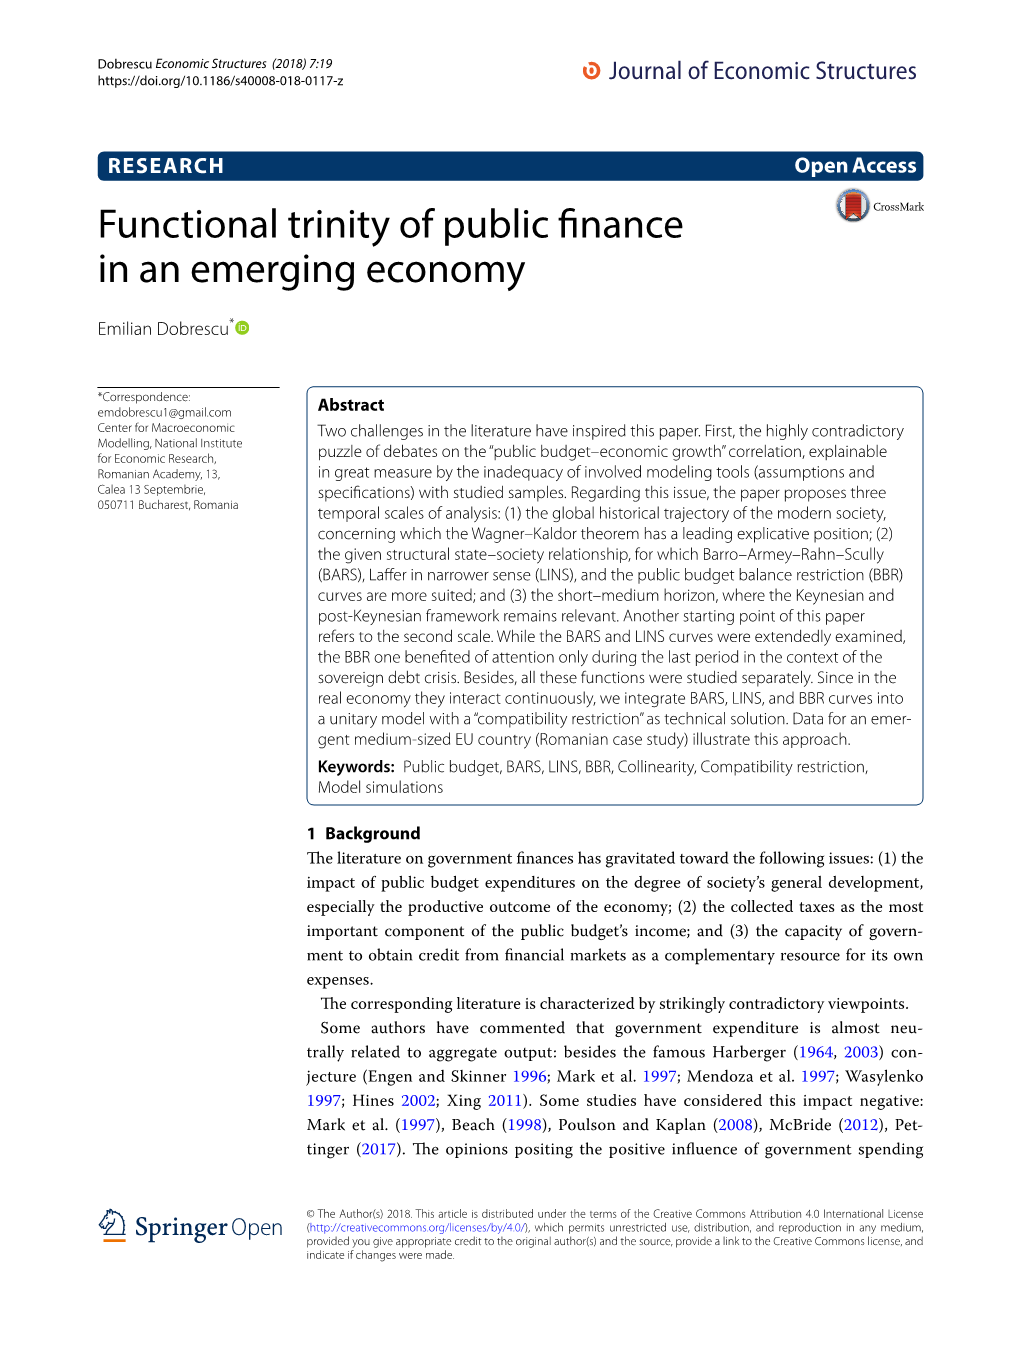 Functional Trinity of Public Finance in an Emerging Economy